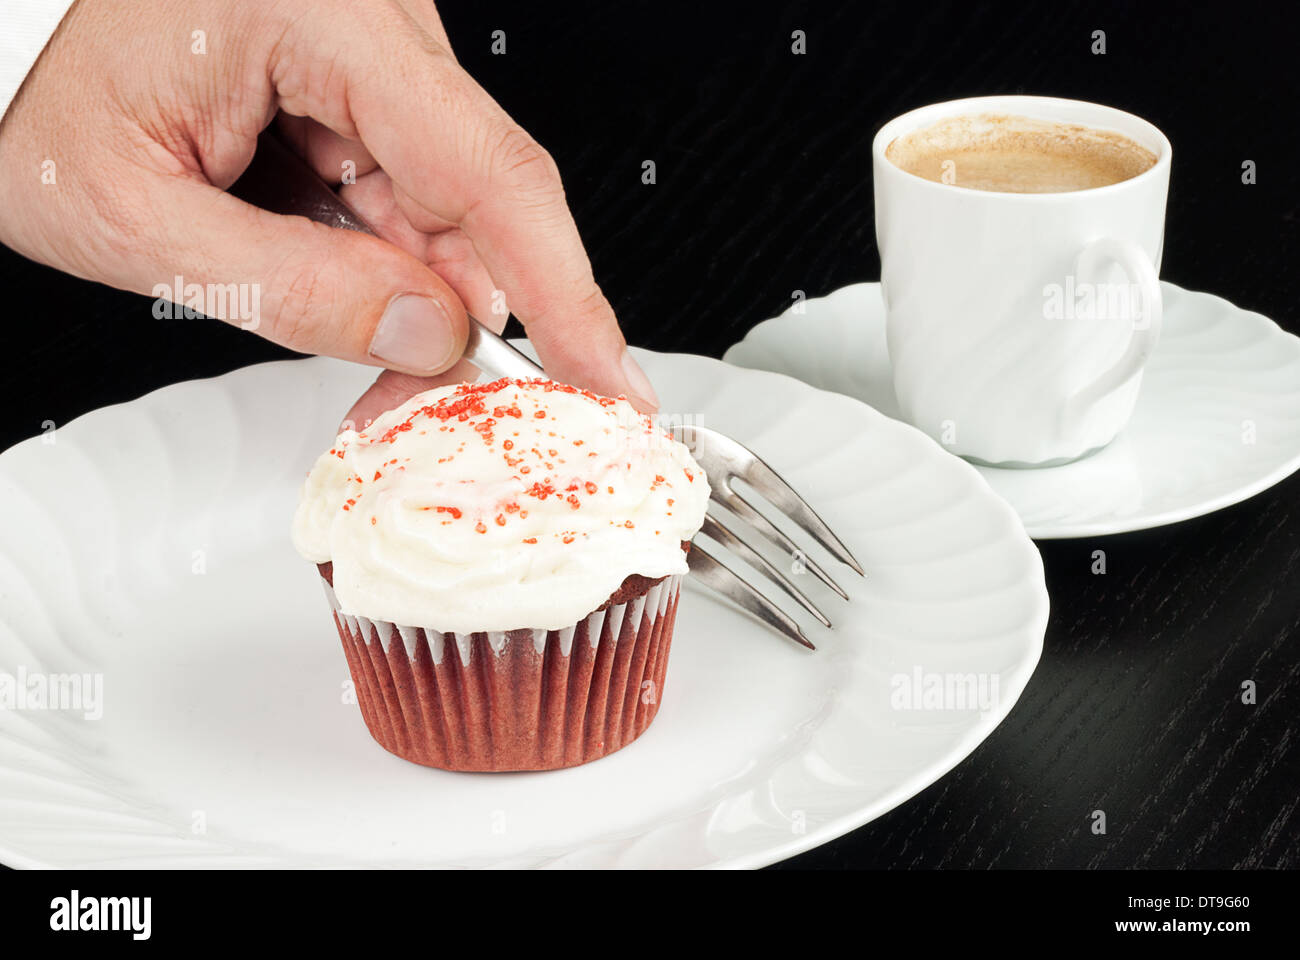 Close-up of a red velvet cupcake on a plate with a man's hand picking up a fork to eat it, espresso in the background. Stock Photo